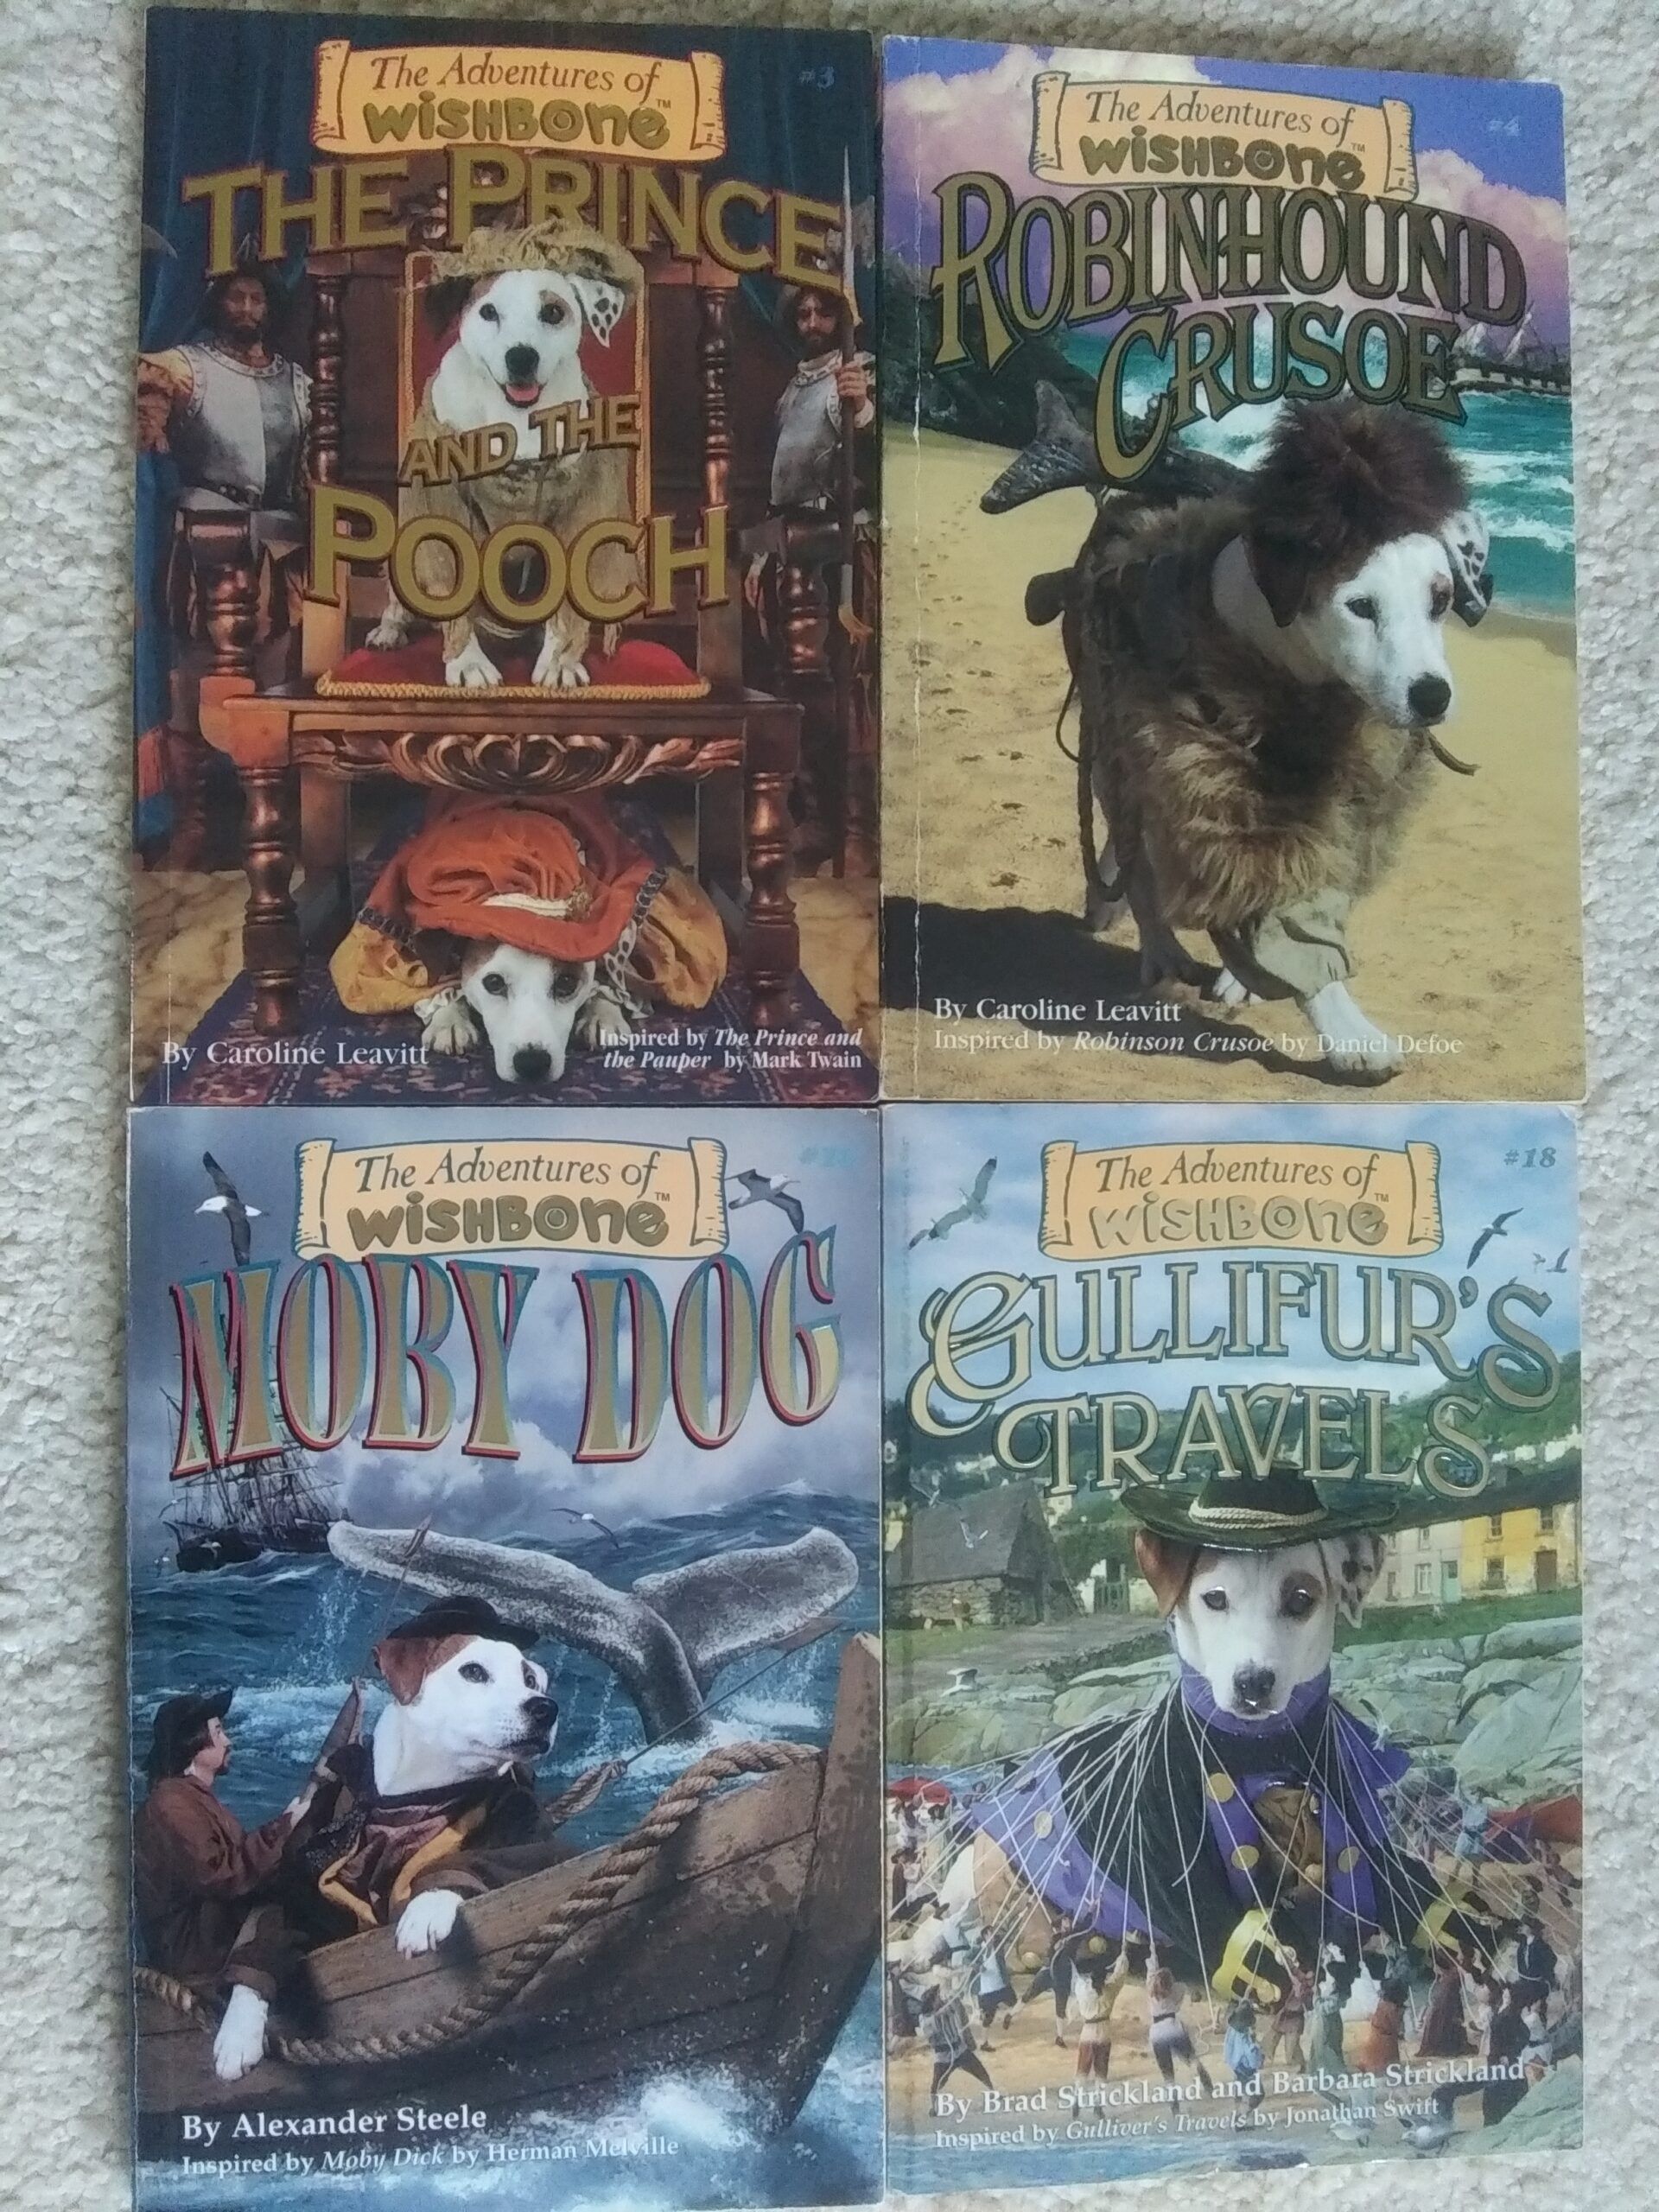 Author photos of four books in the "Adventures of Wishbone" series: The Prince and the Pooch, Robinhound Crusoe, Moby Dog, and Gullifur's Travels